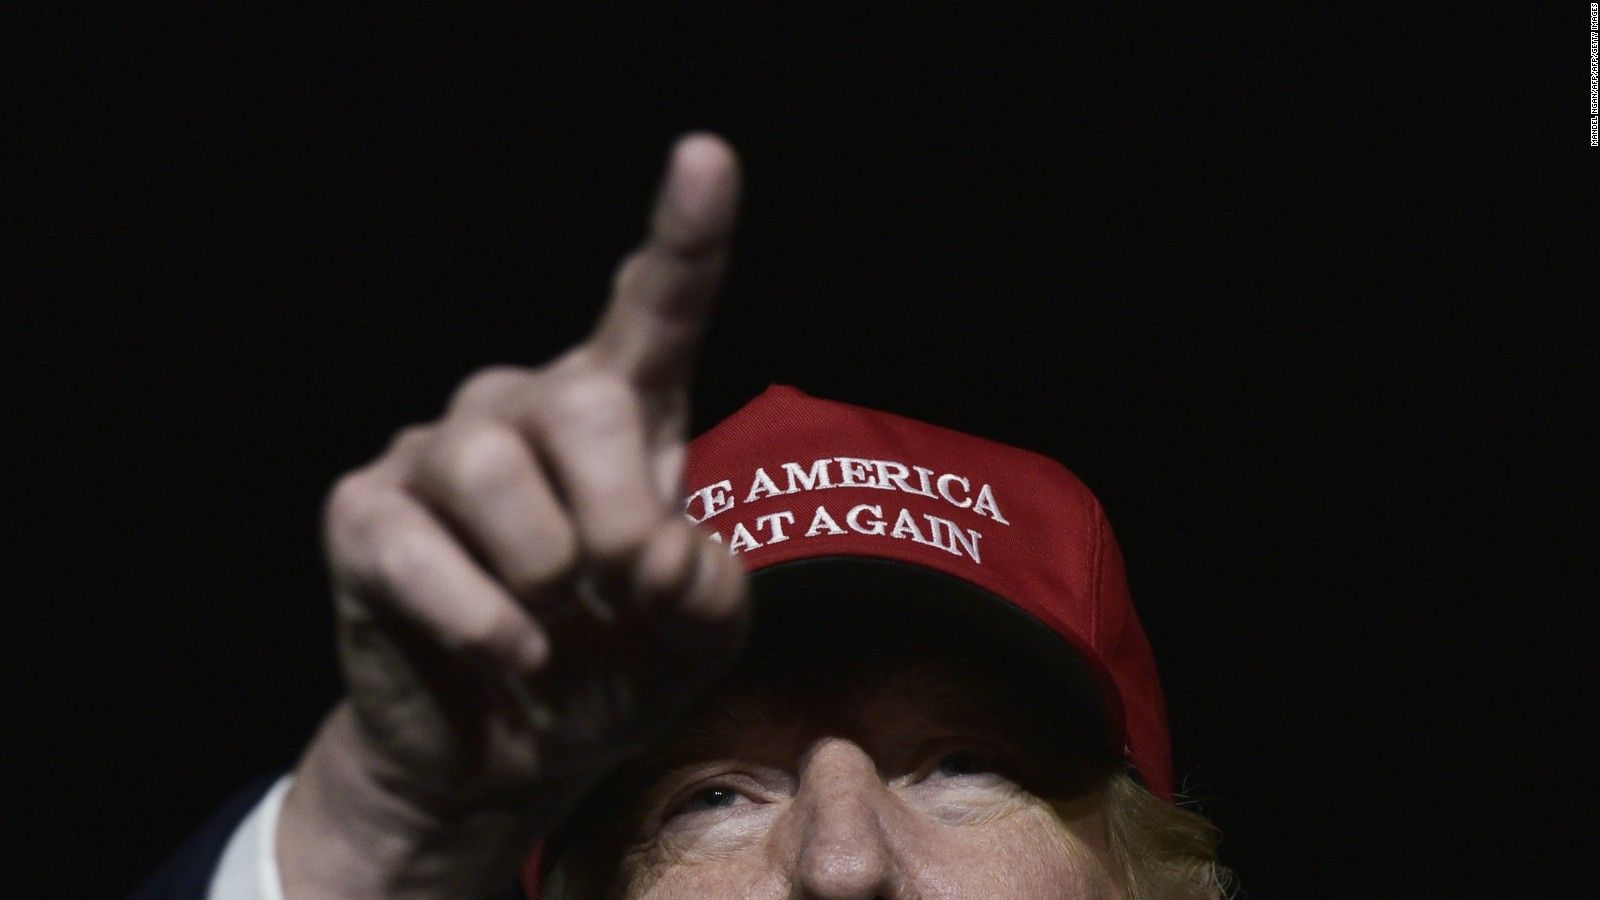 How the Trump hat became an icon